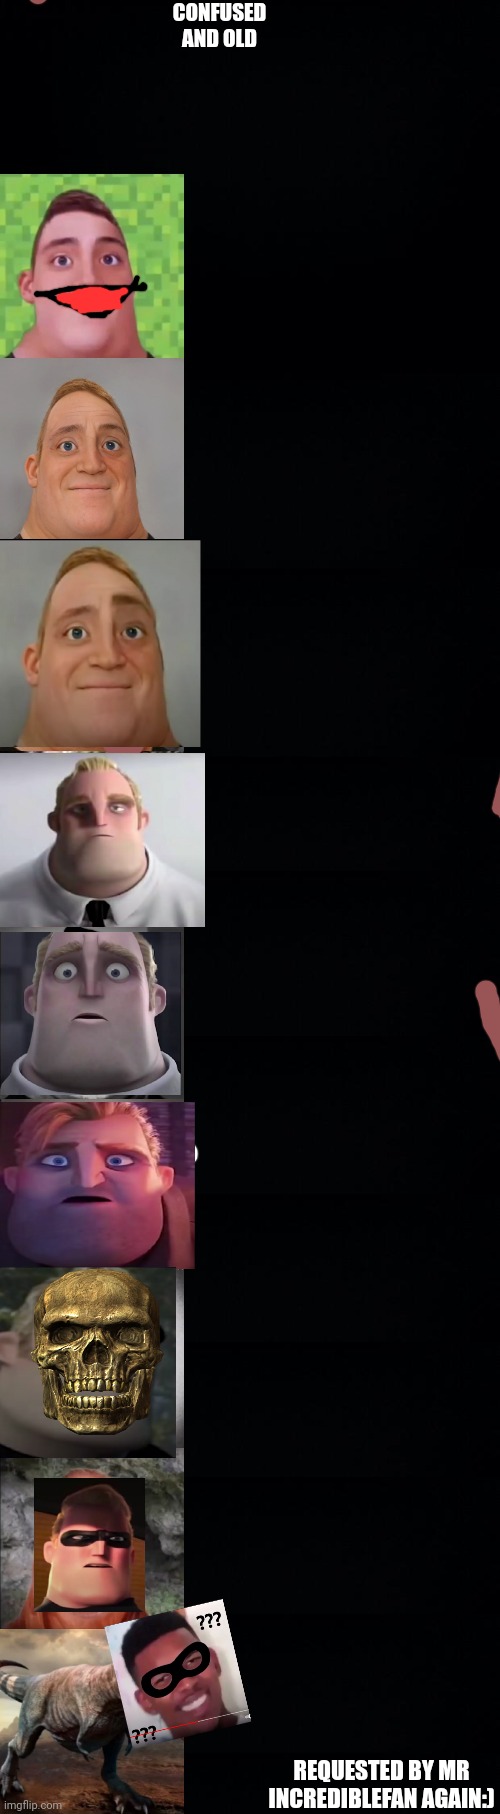 mr incredible becoming old Memes & GIFs - Imgflip